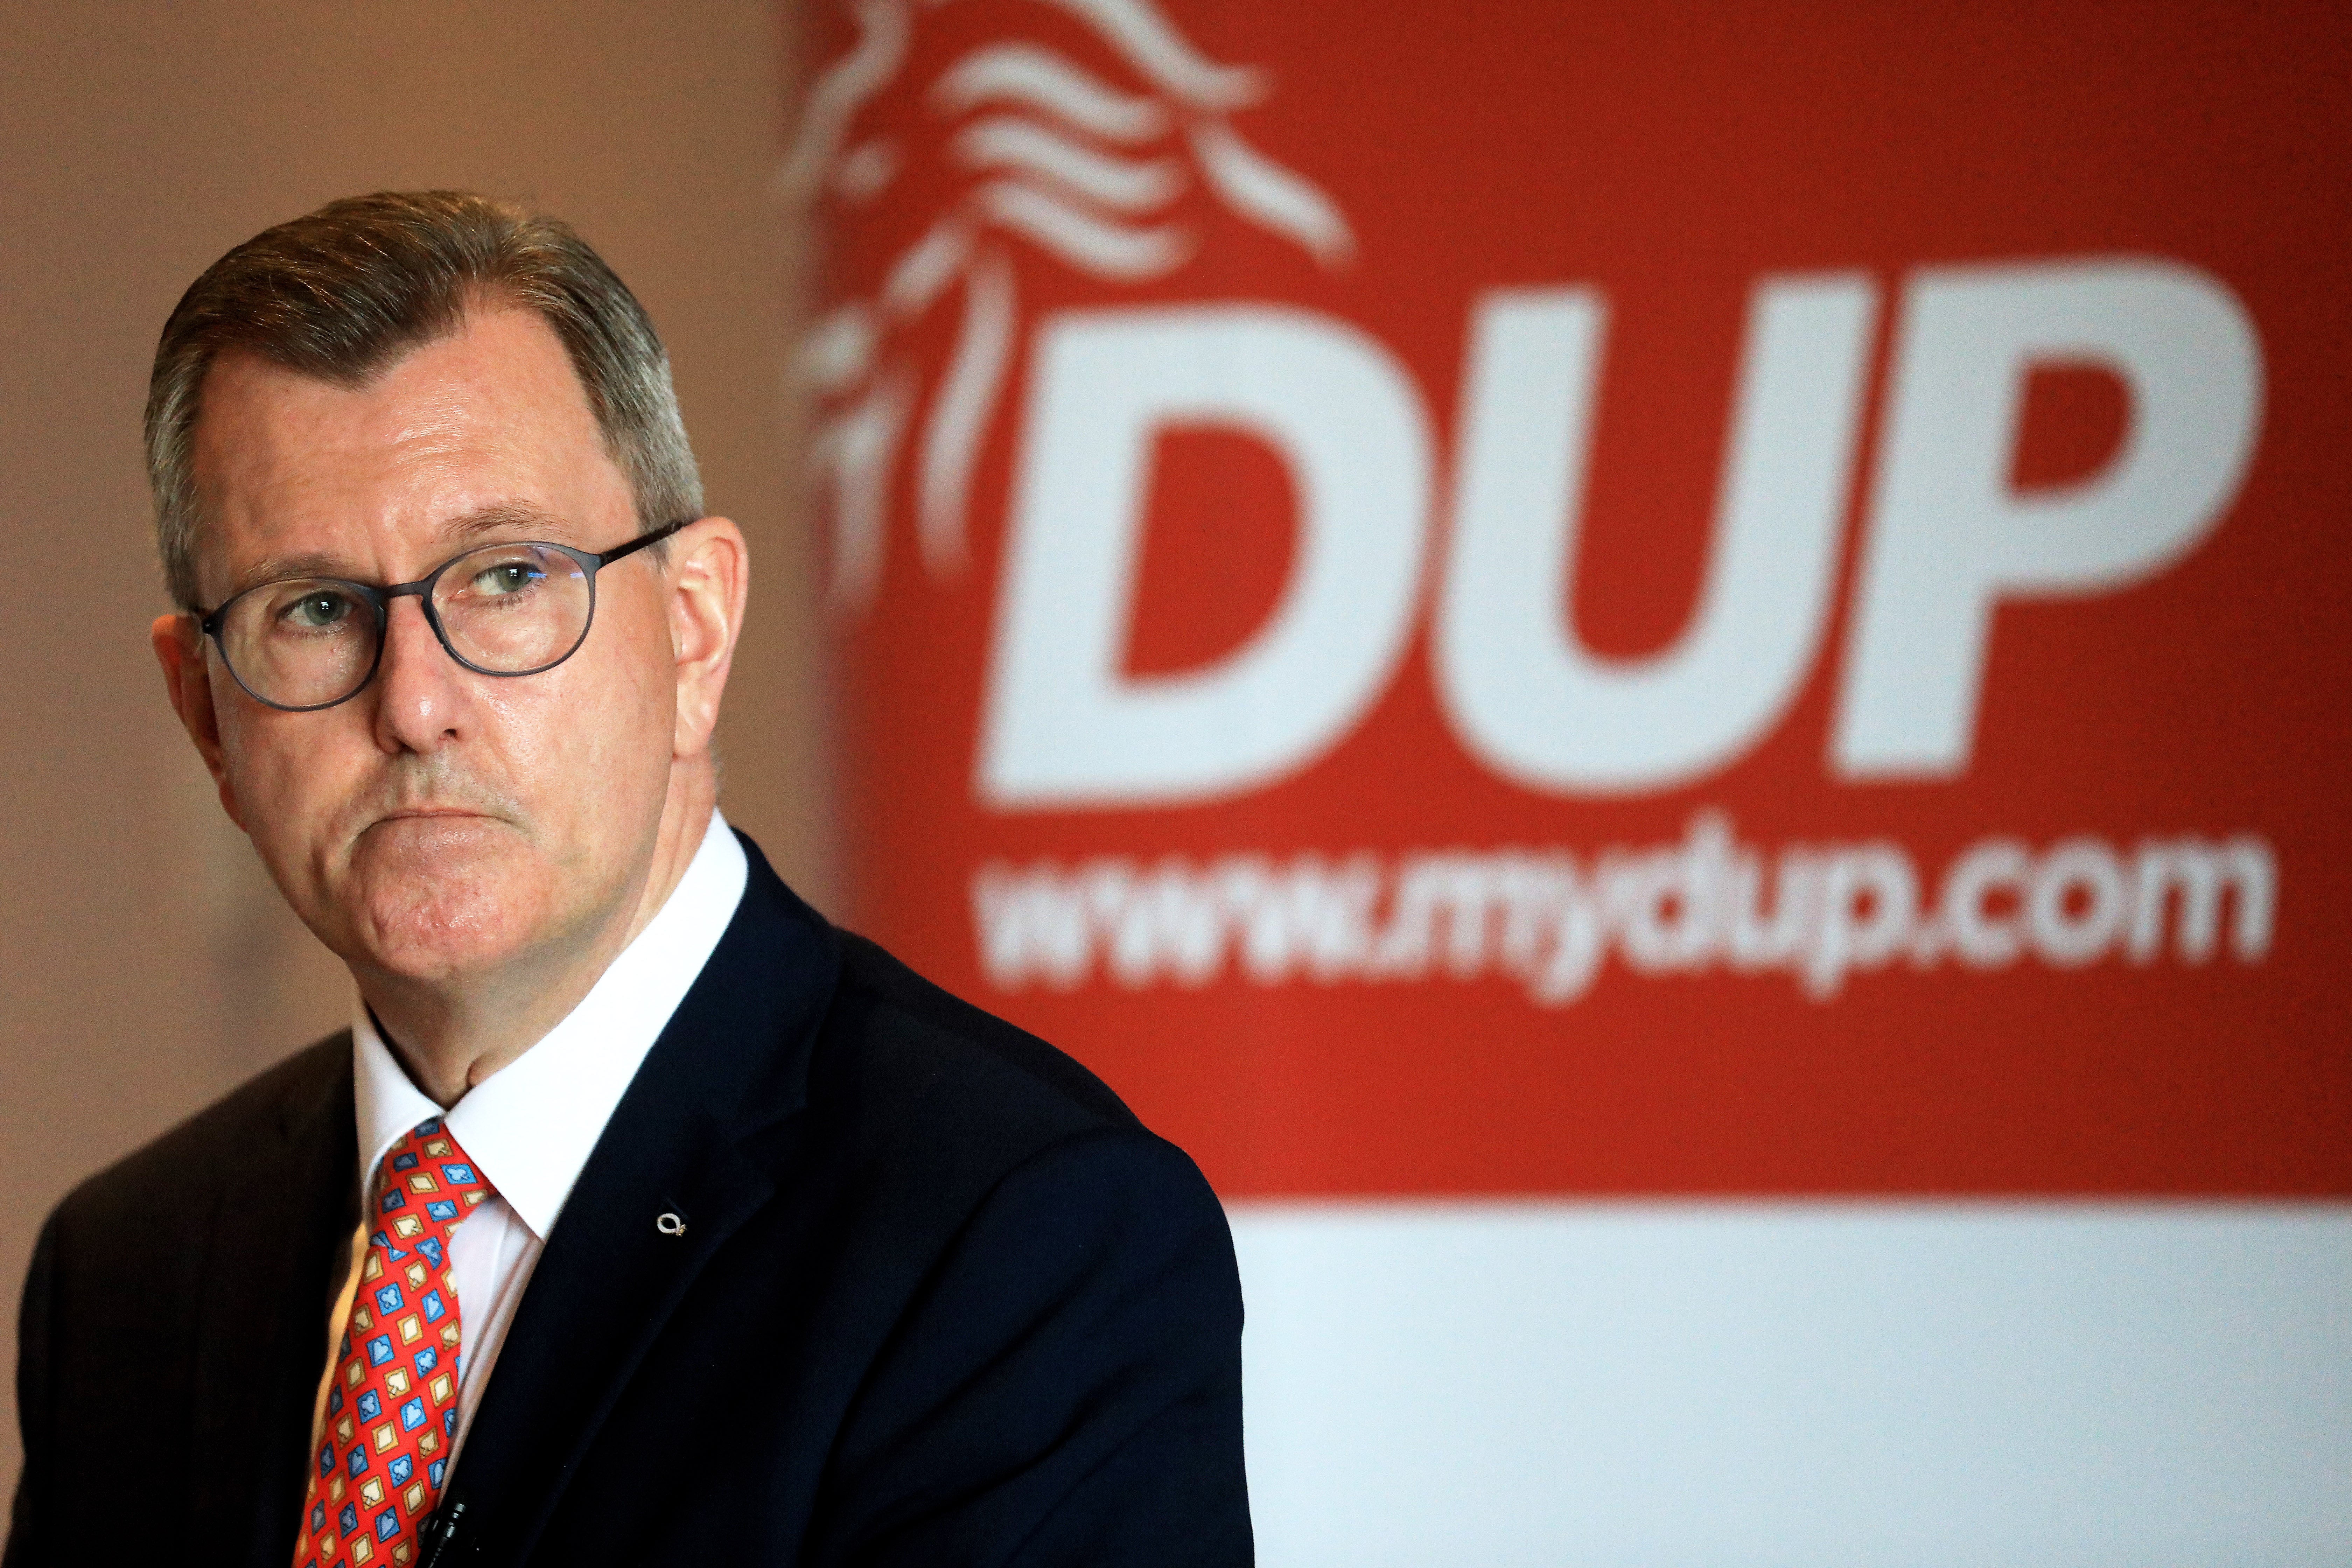 DUP leader Sir Jeffrey Donaldson has said his door remains open for Wesley Irvine, a North Down councillor who quit the party (Peter Morrison/PA)